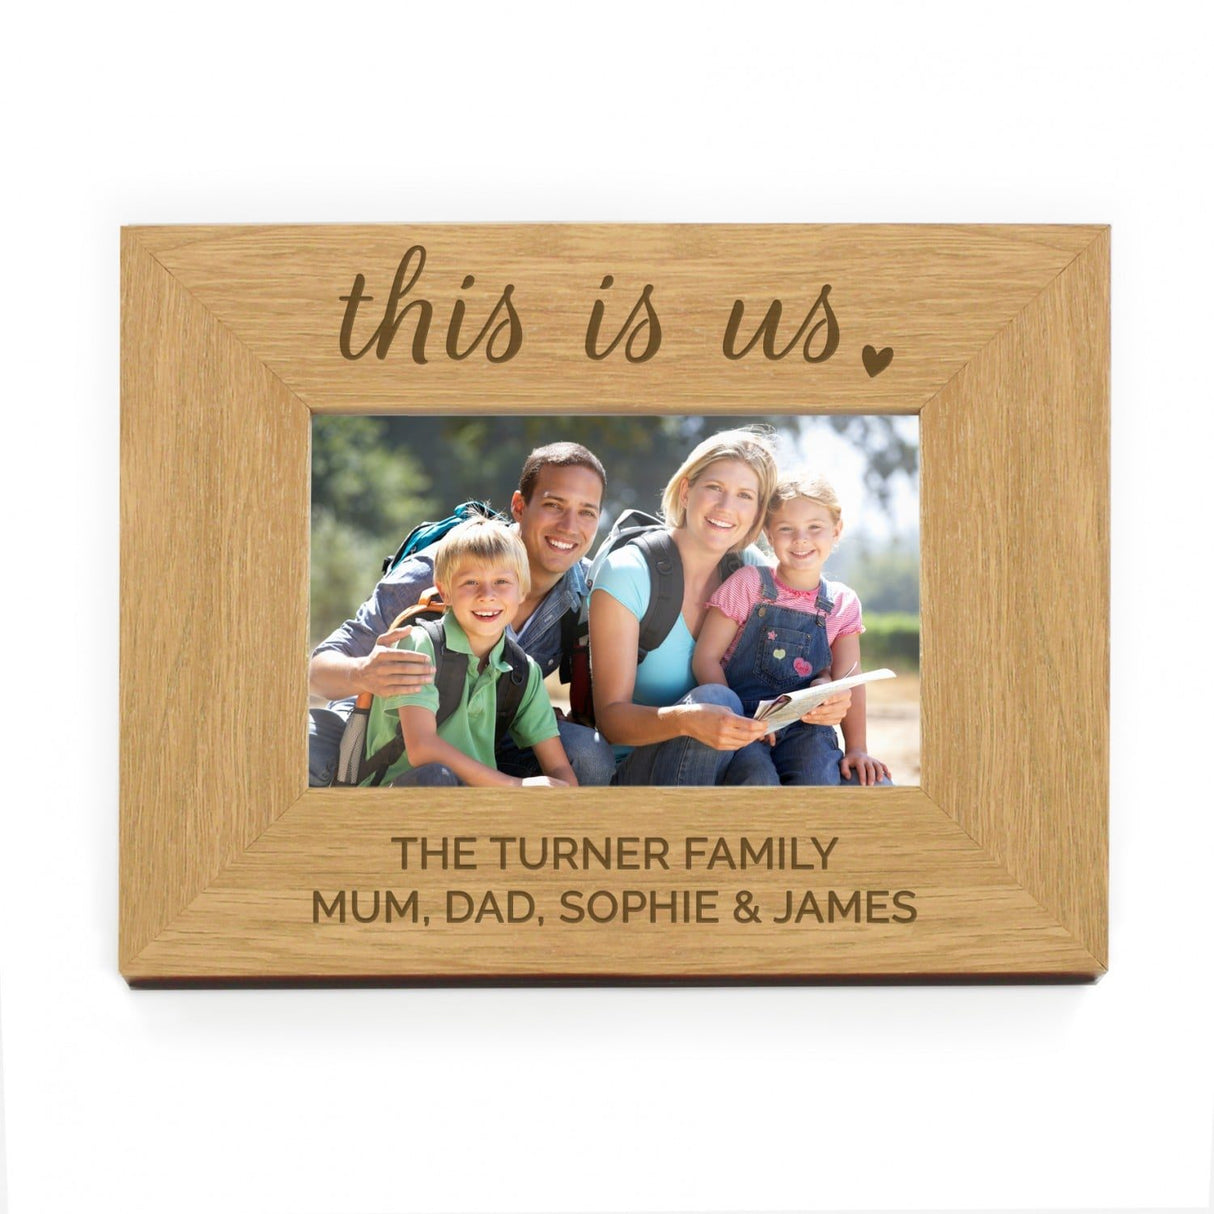 This Is Us' 6x4 Landscape Wooden Photo Frame - Gift Moments